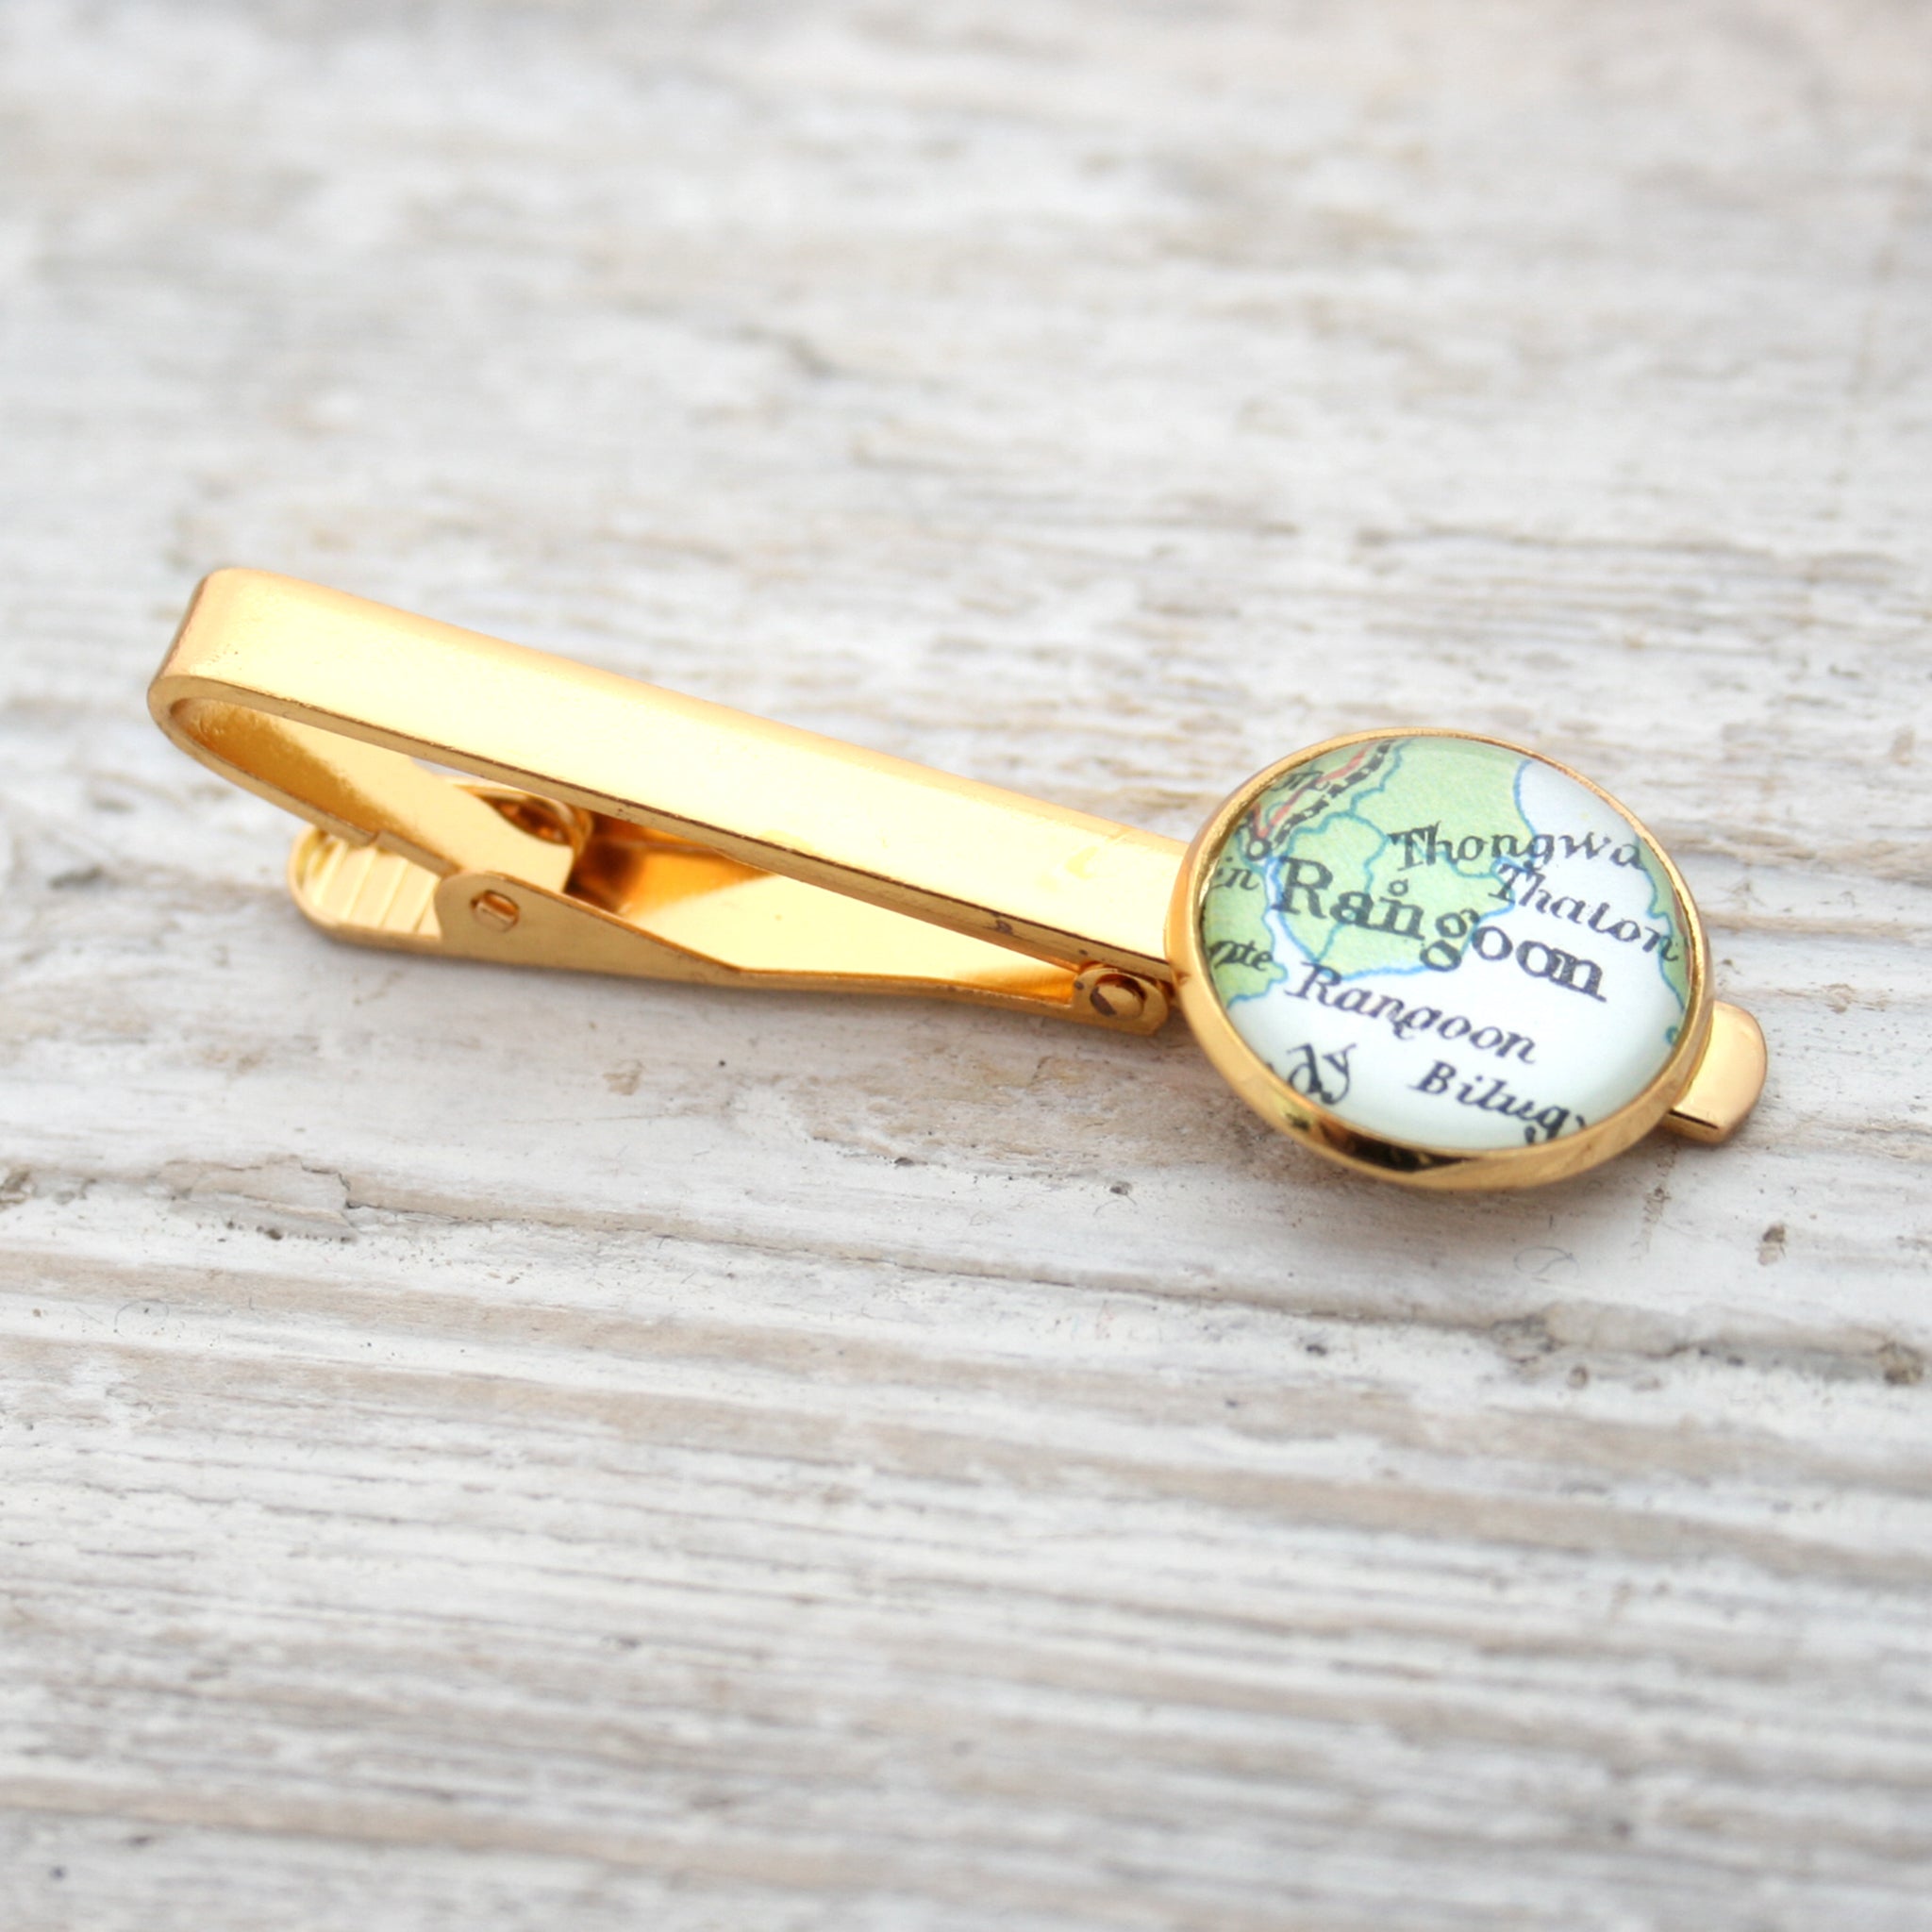 Personalised Tie Clip in gold color featuring map of Rangoon